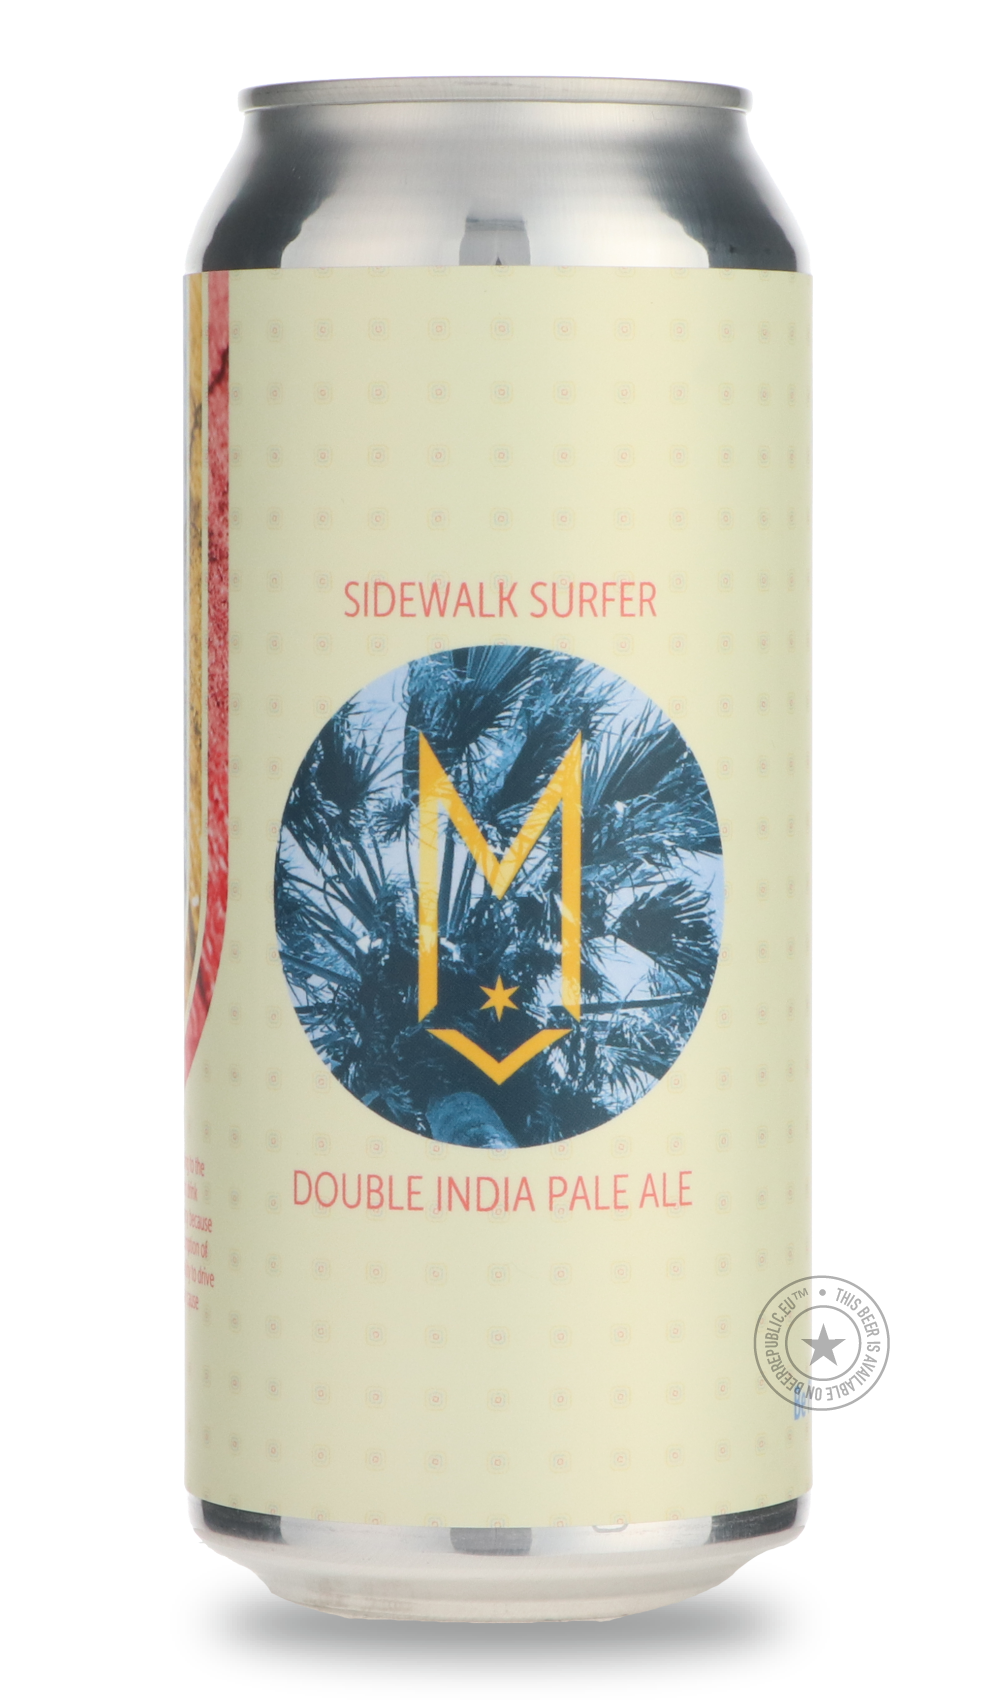 -Maplewood- Sidewalk Surfer-IPA- Only @ Beer Republic - The best online beer store for American & Canadian craft beer - Buy beer online from the USA and Canada - Bier online kopen - Amerikaans bier kopen - Craft beer store - Craft beer kopen - Amerikanisch bier kaufen - Bier online kaufen - Acheter biere online - IPA - Stout - Porter - New England IPA - Hazy IPA - Imperial Stout - Barrel Aged - Barrel Aged Imperial Stout - Brown - Dark beer - Blond - Blonde - Pilsner - Lager - Wheat - Weizen - Amber - Barle